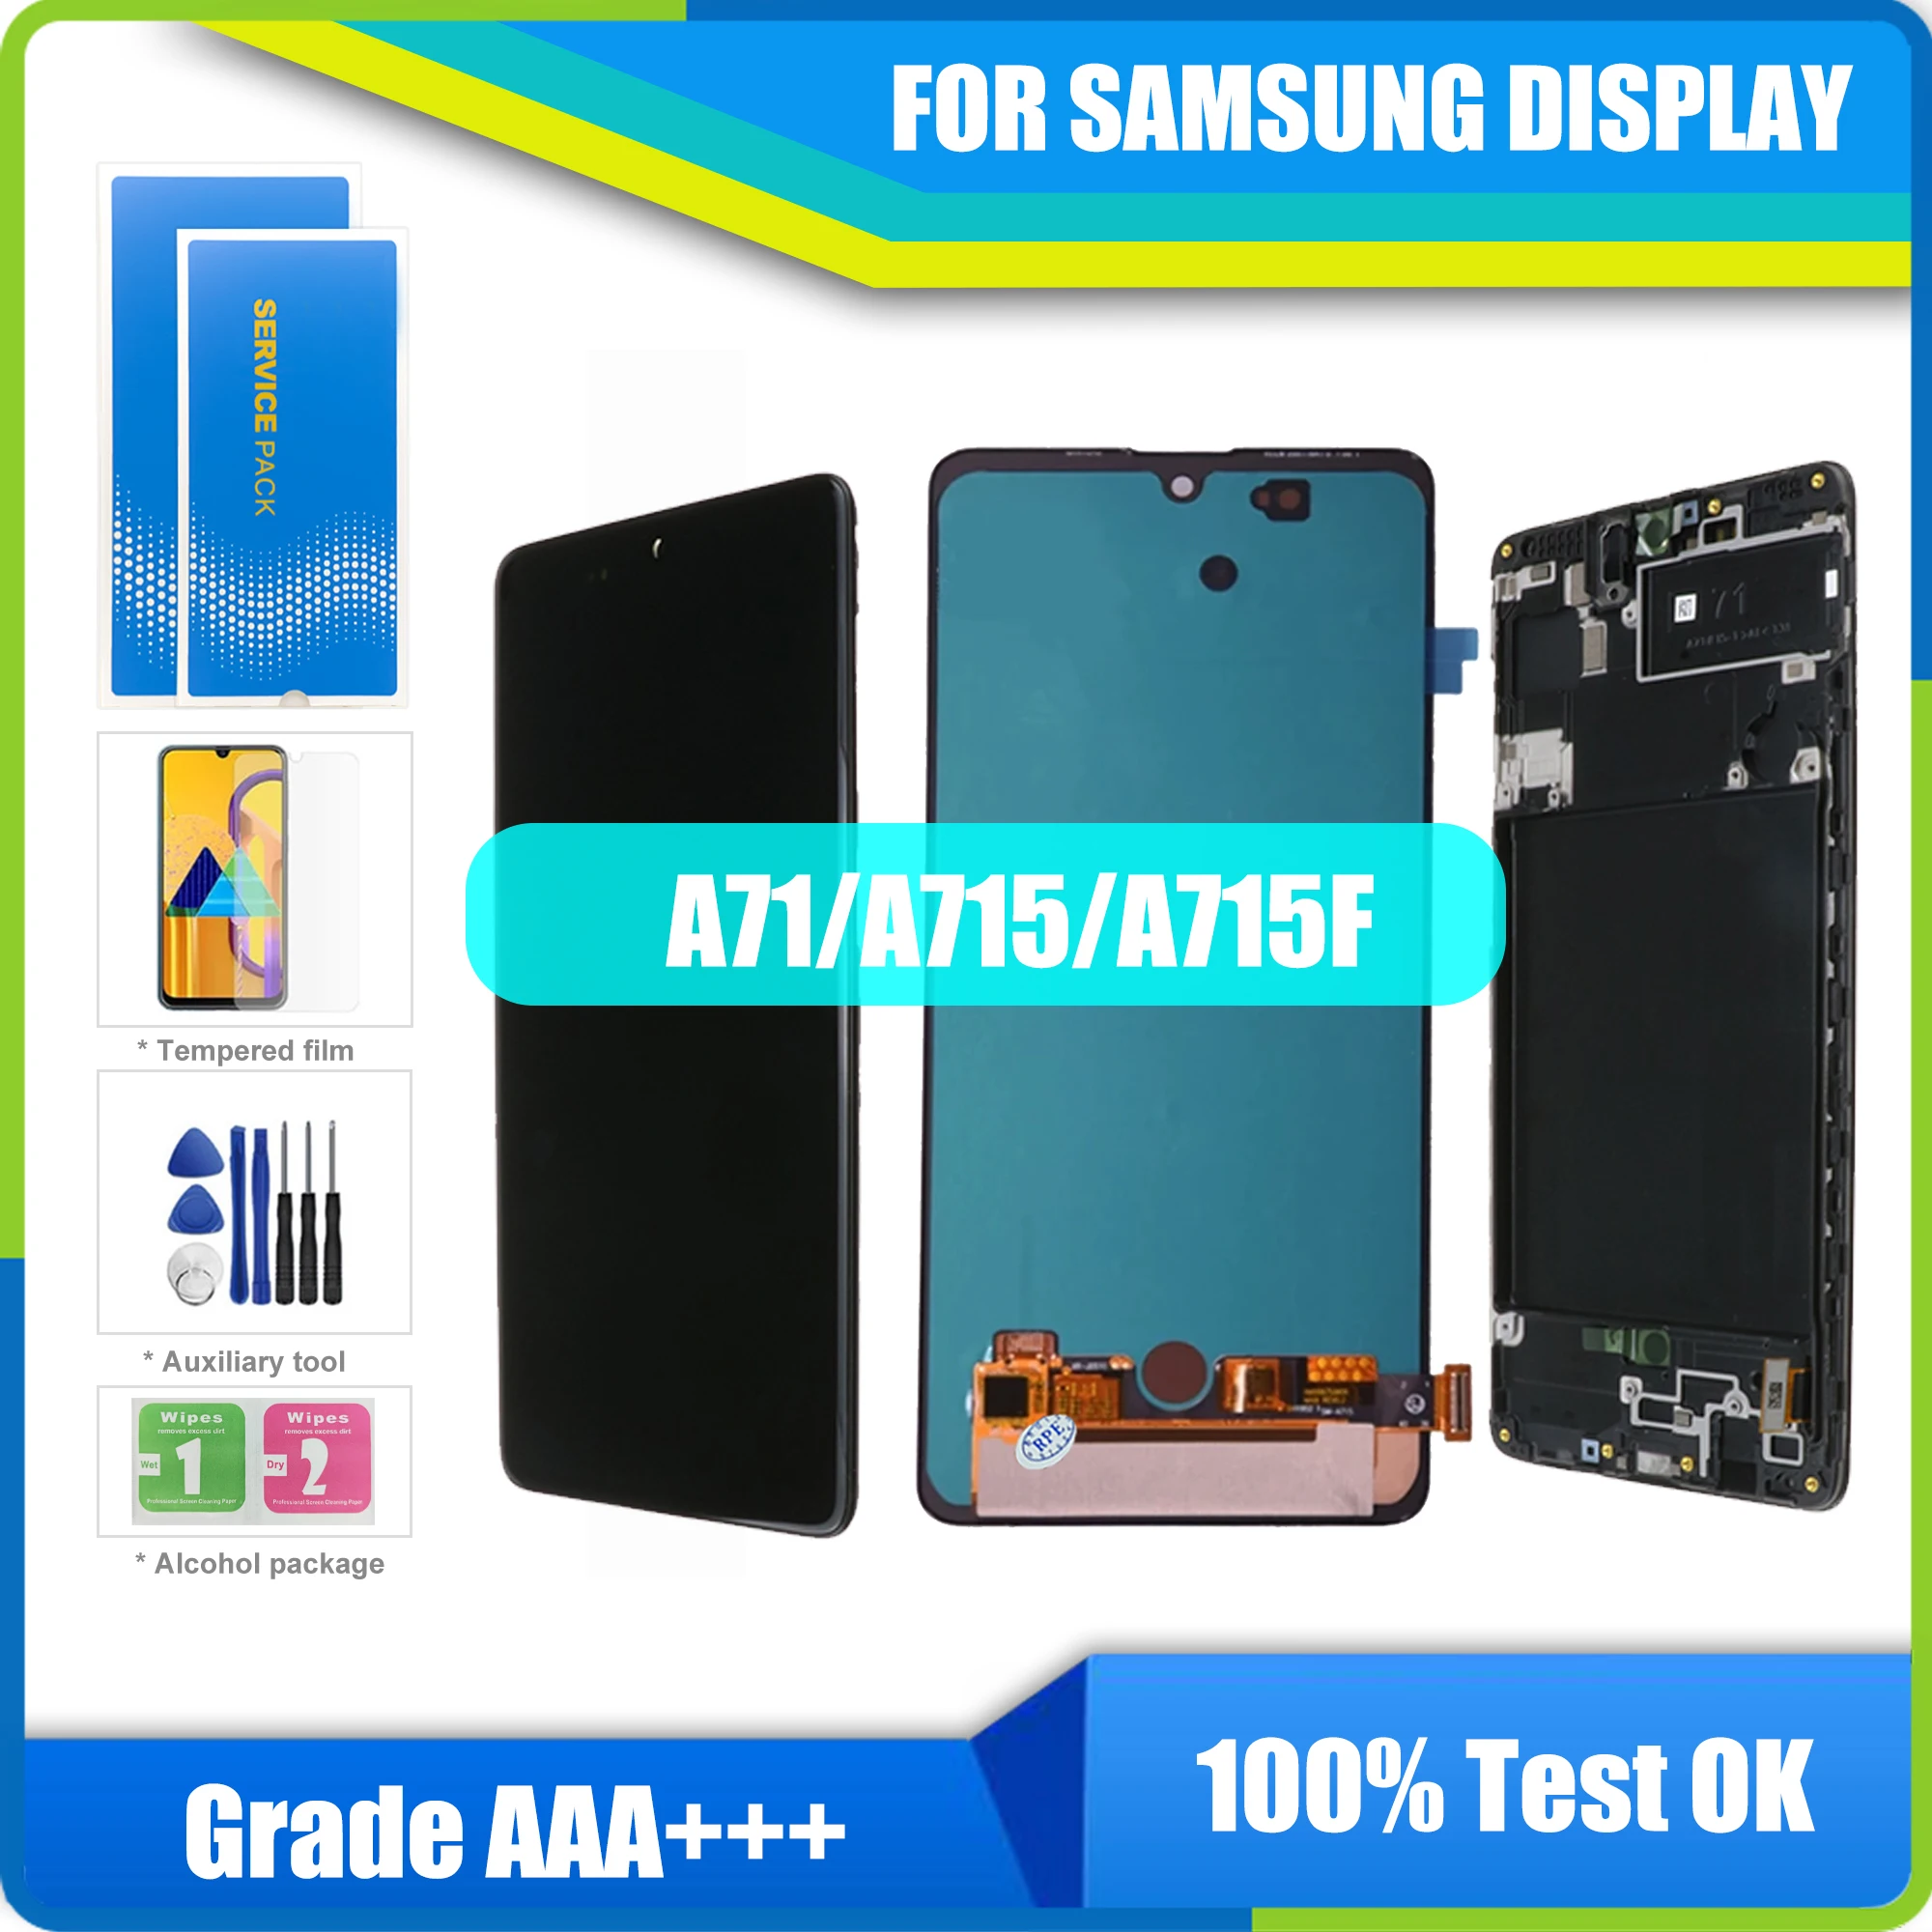 100% Original AMOLED For Samsung Galaxy A71 LCD Touch Digitizer Sensor Glass Assembly For Samsung A71 Display A715 A715F A715FD